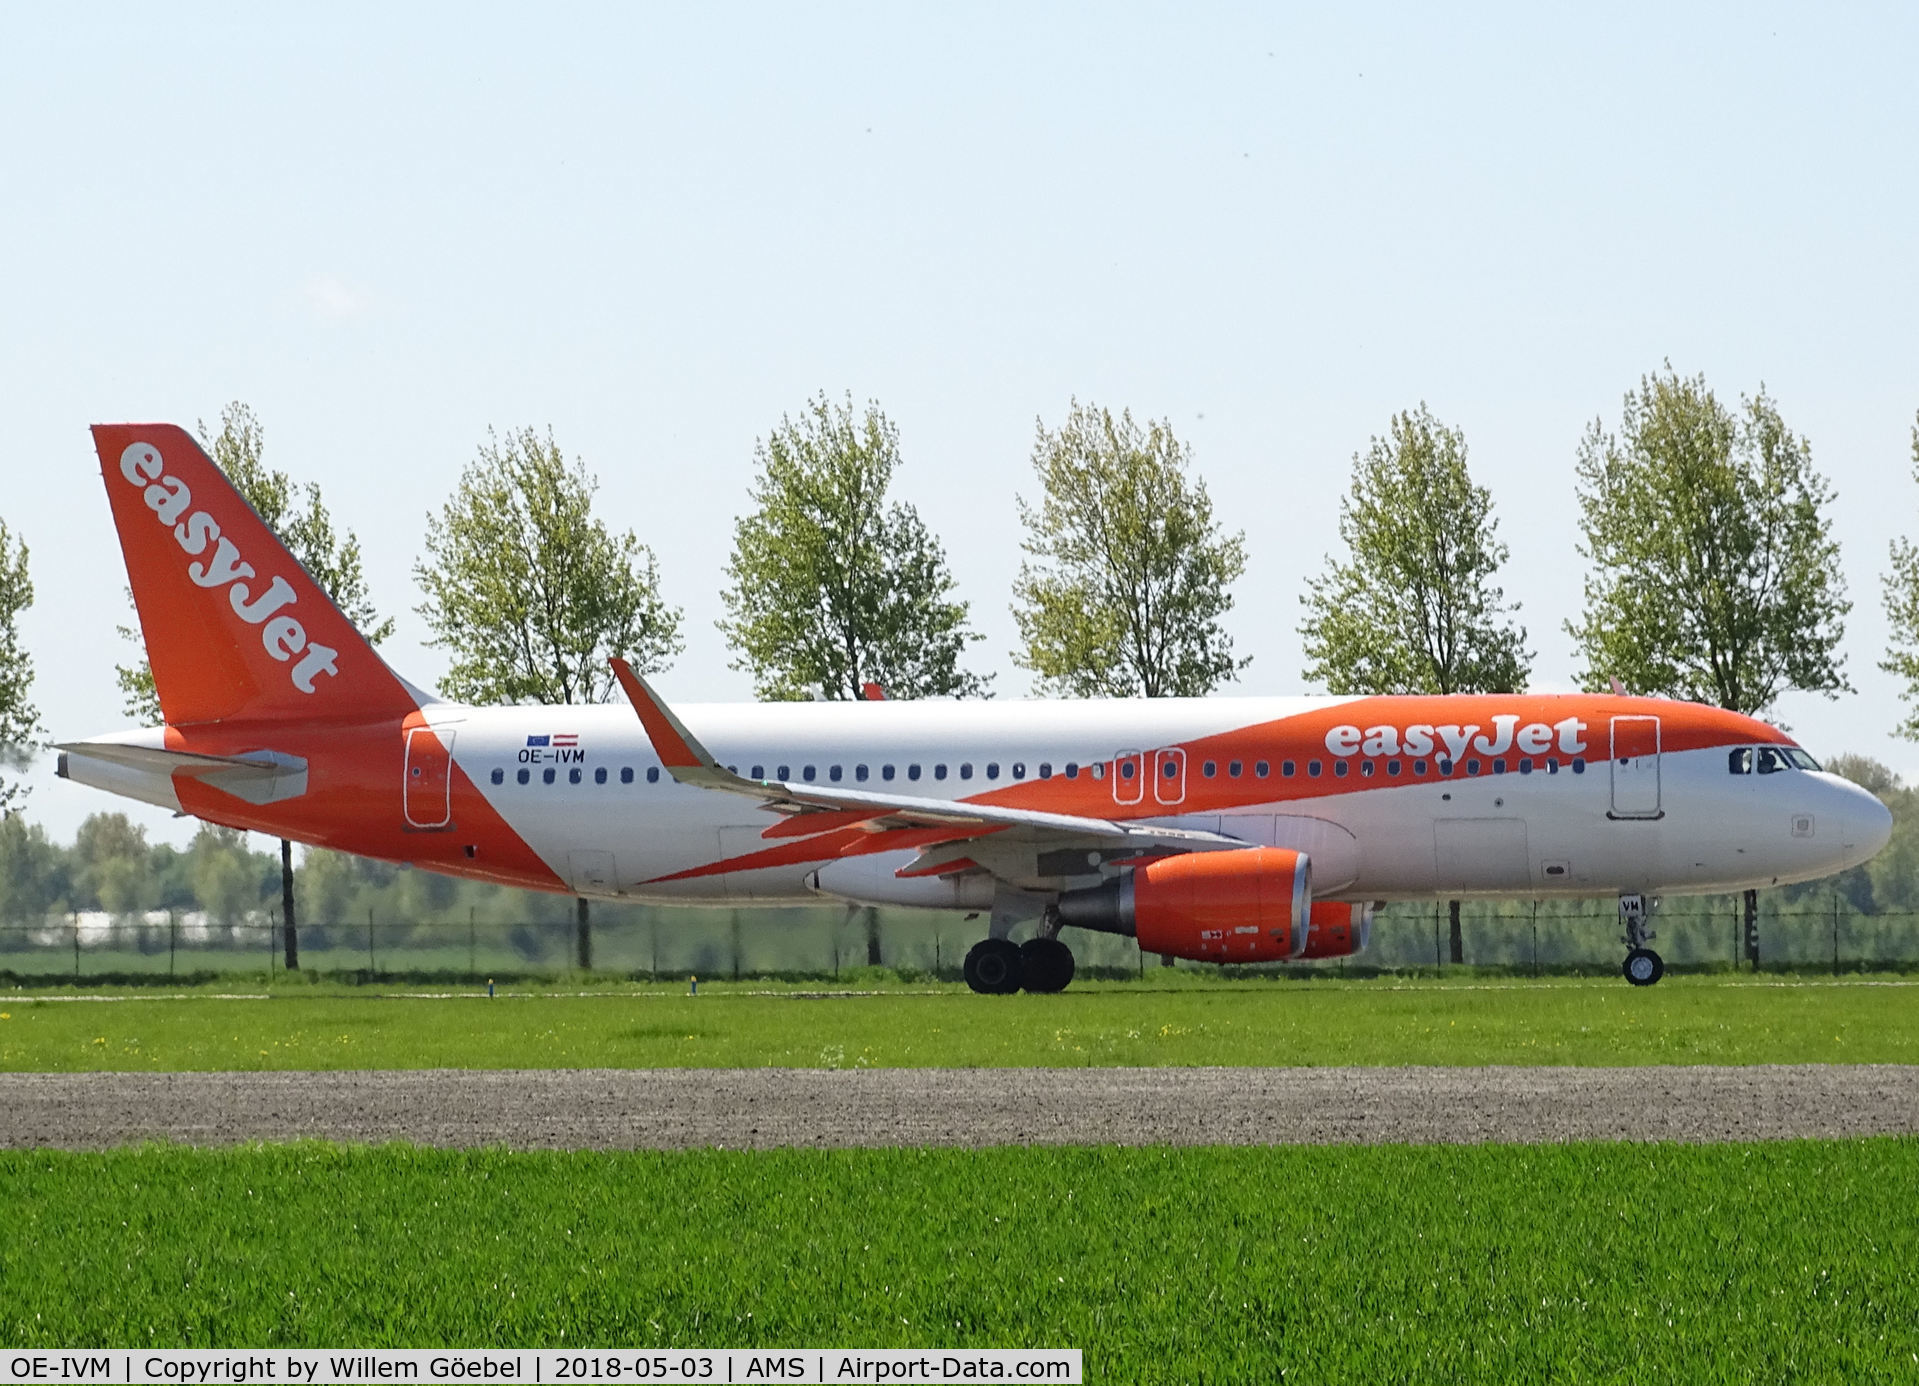 OE-IVM, 2017 Airbus A320-214 C/N 7537, Taxi to runway 36L of Schiphol Airport